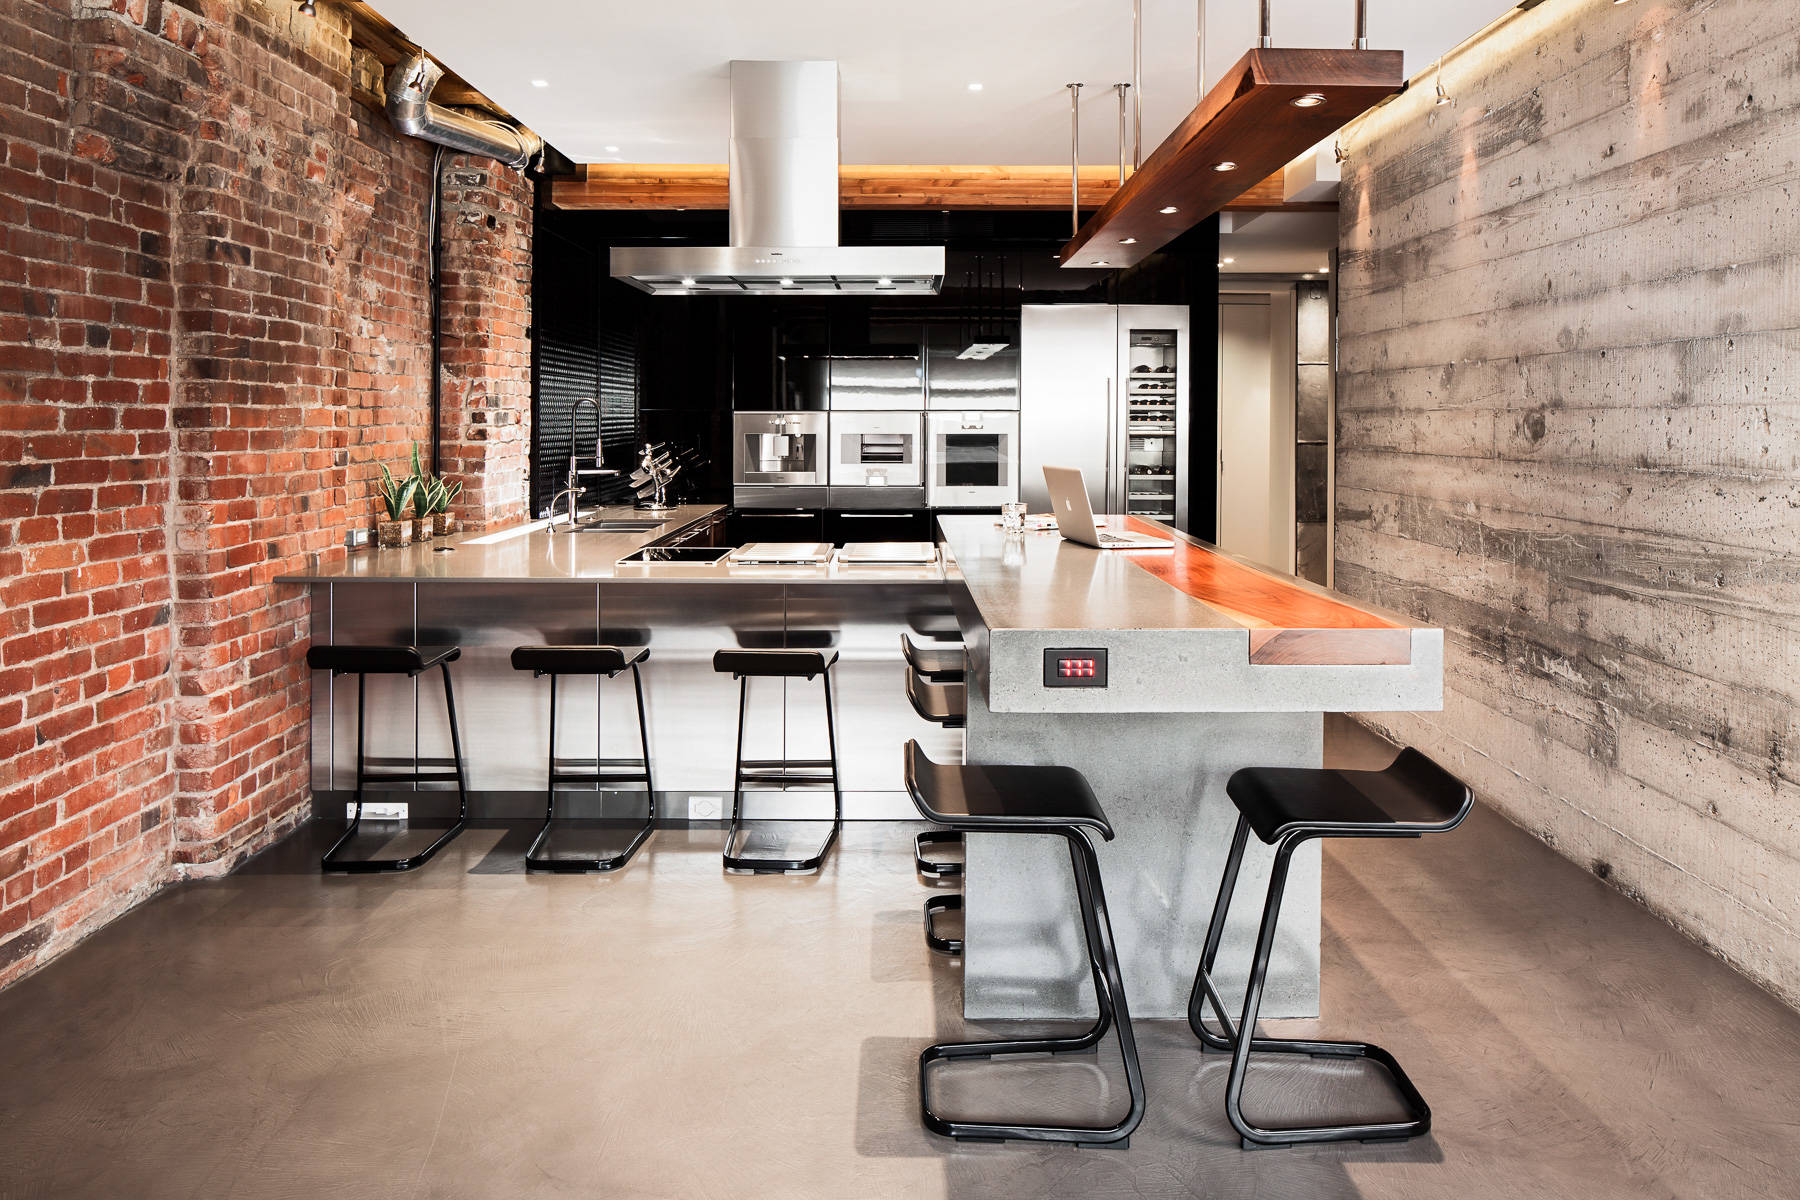 14 Concrete Countertop Ideas for a Stylish Industrial Kitchen